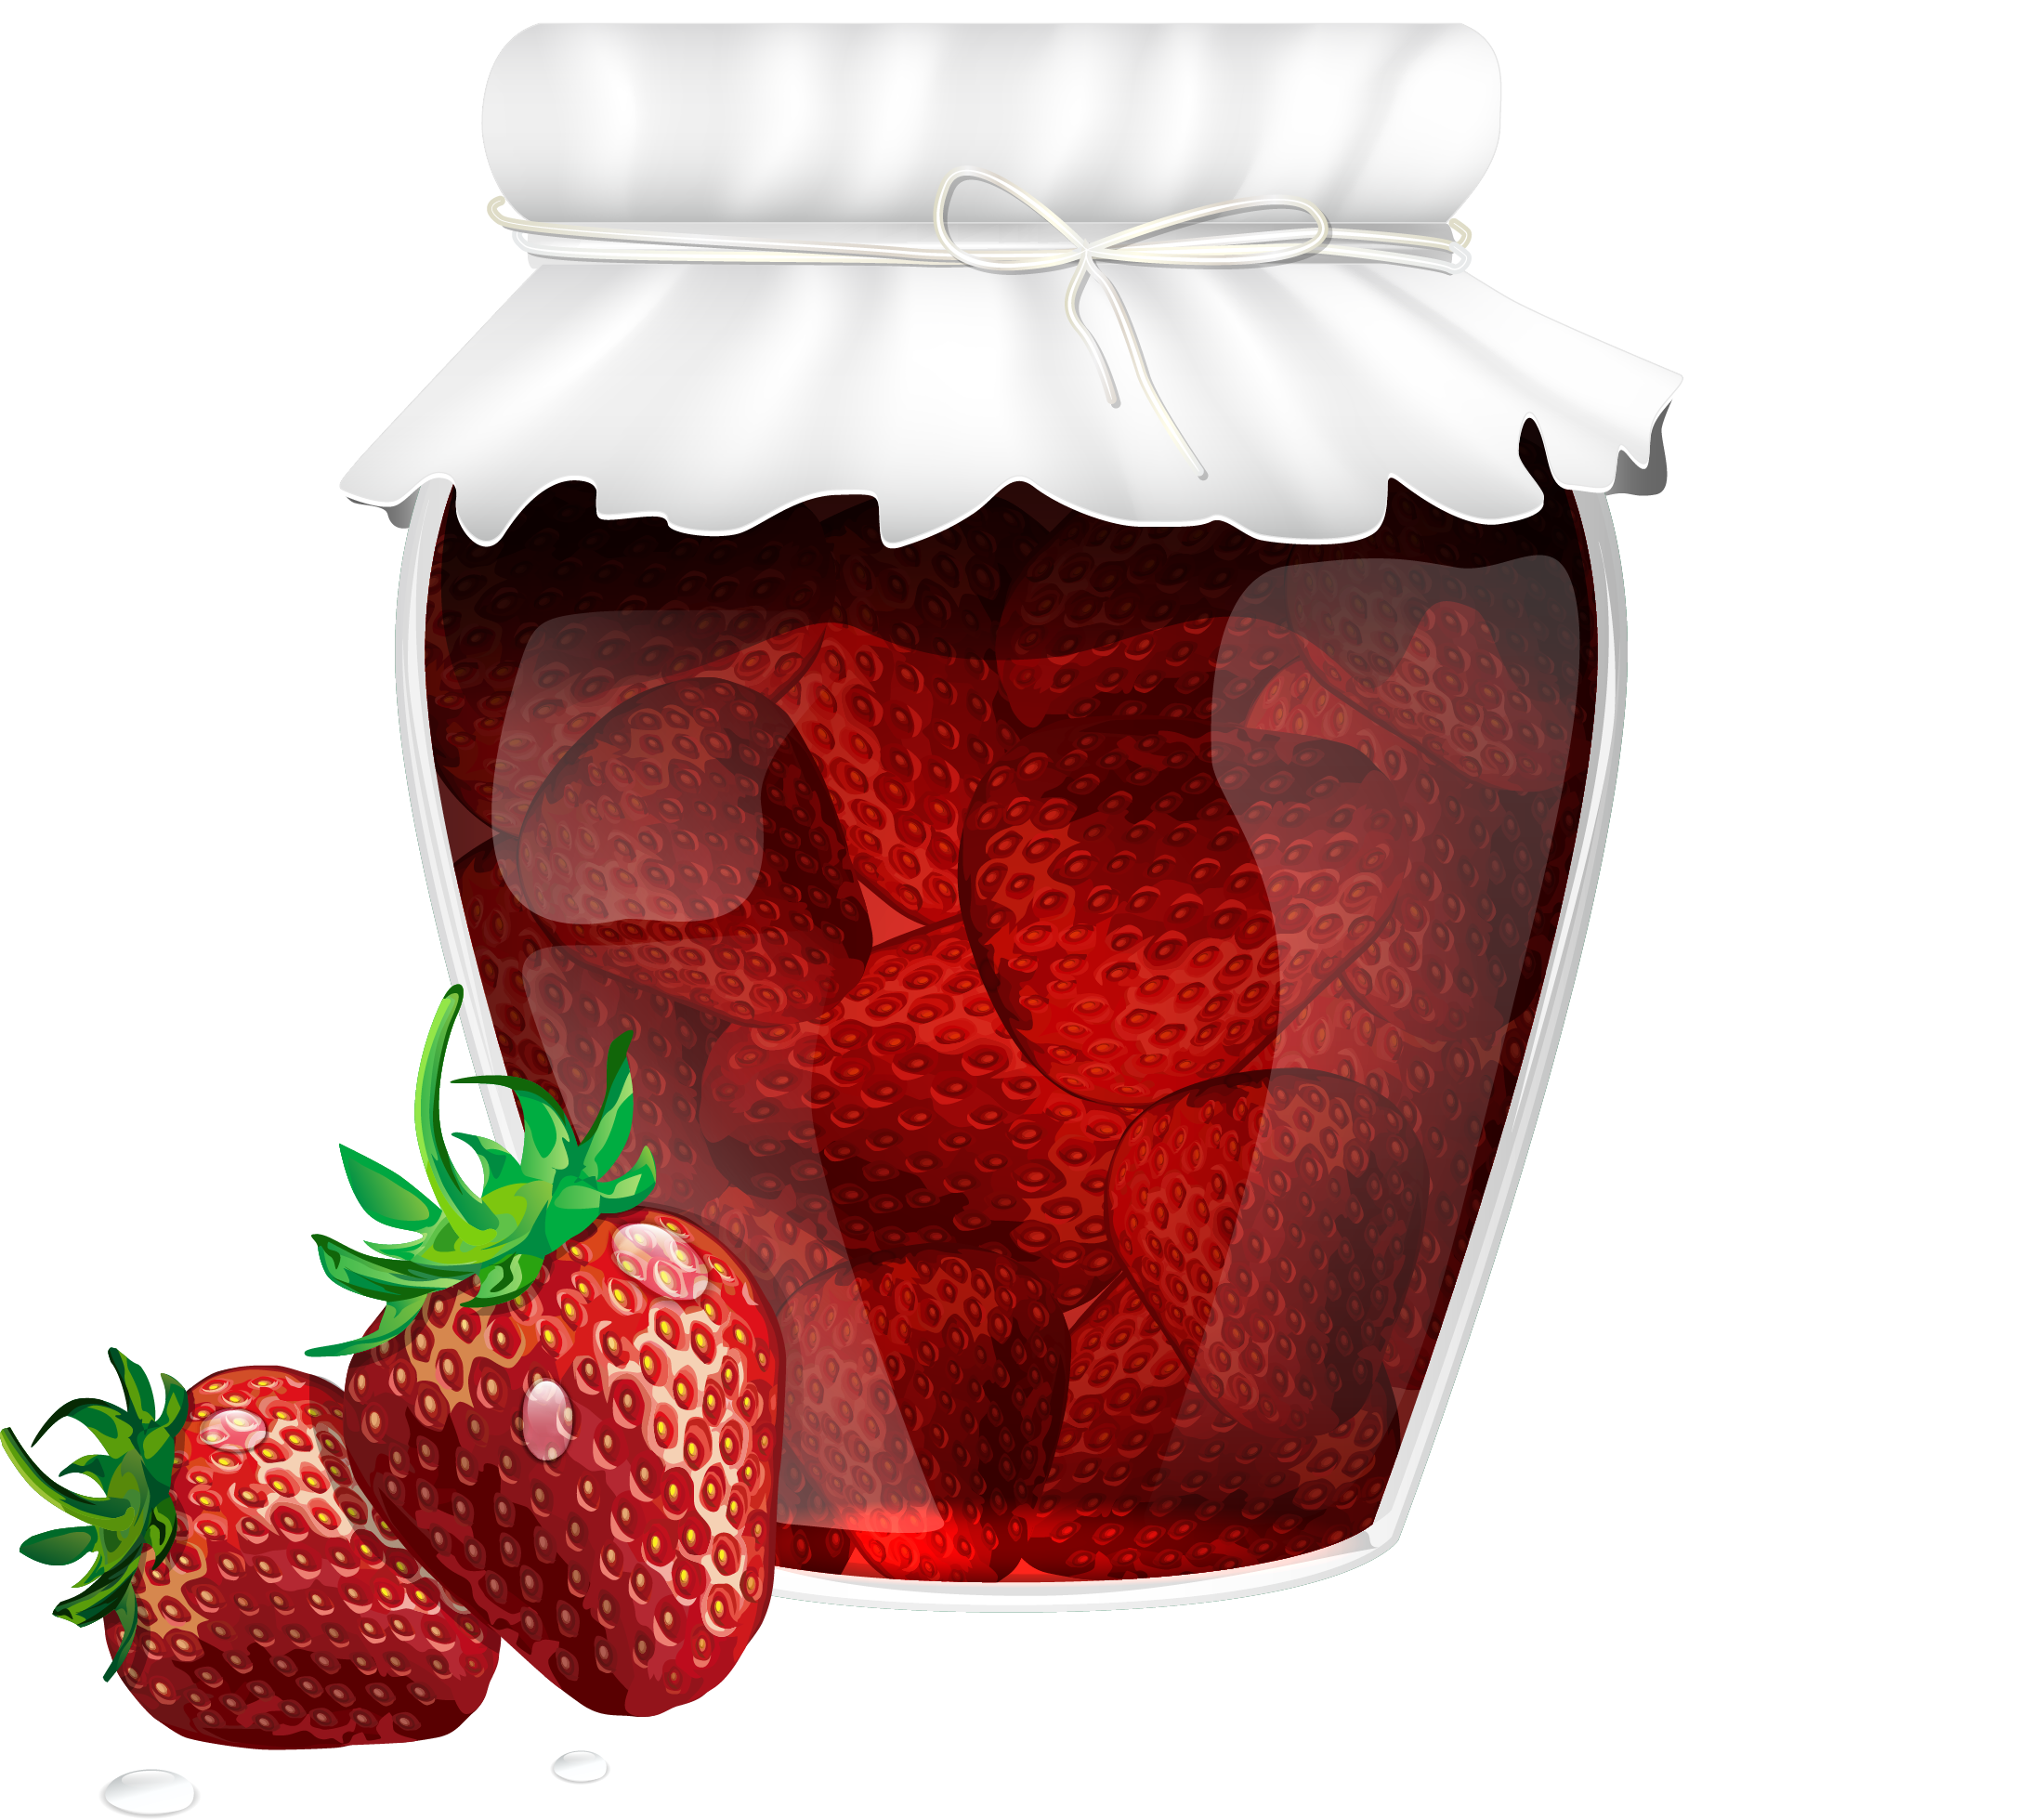 A Jar Of Strawberries And A Couple Of Strawberries